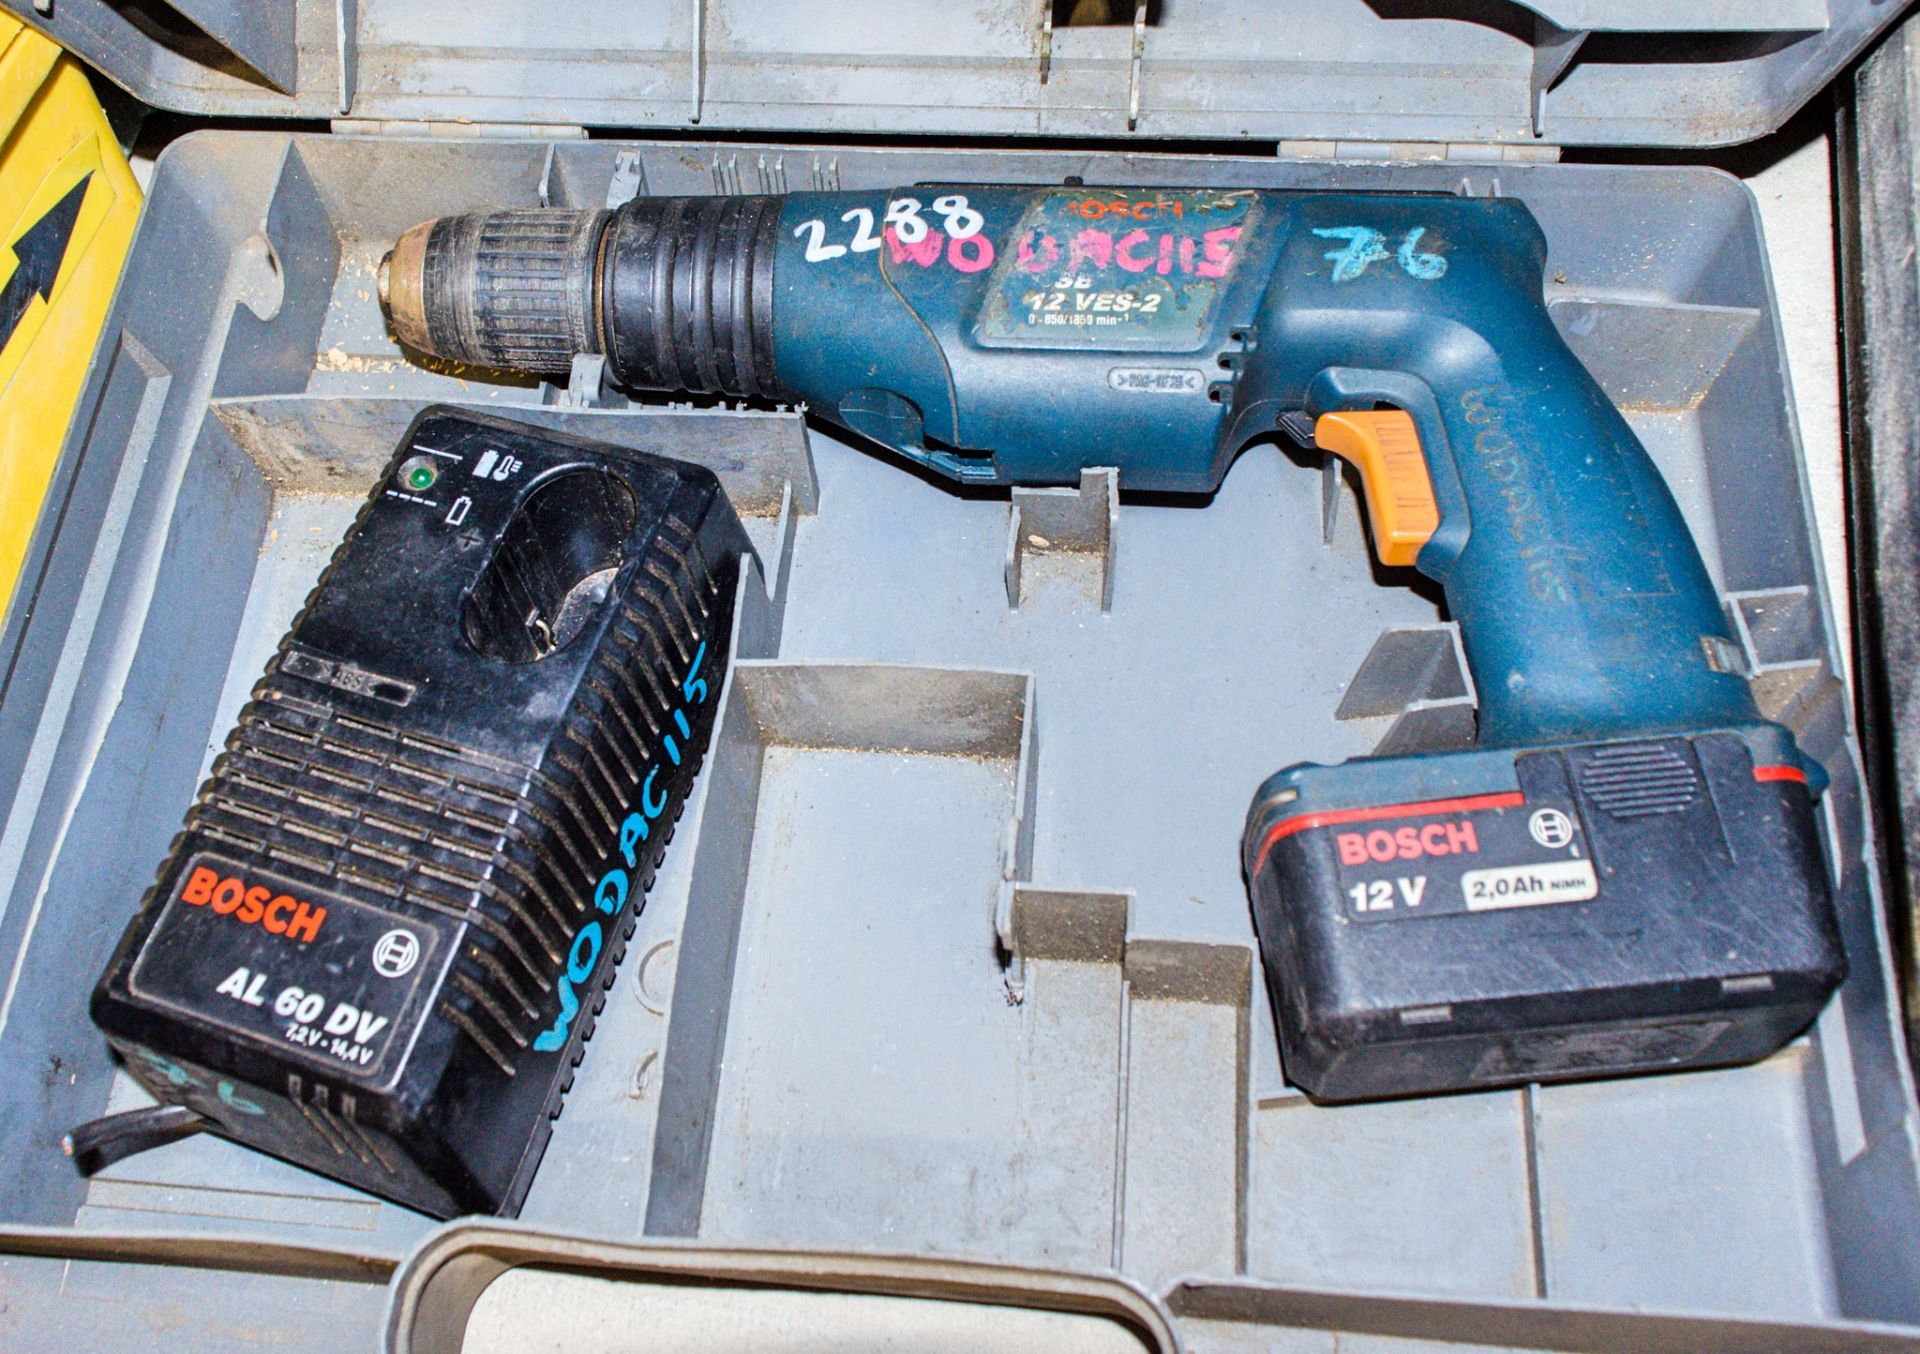 Bosch cordless power drill c/w battery, charger (cord cut) & carry case